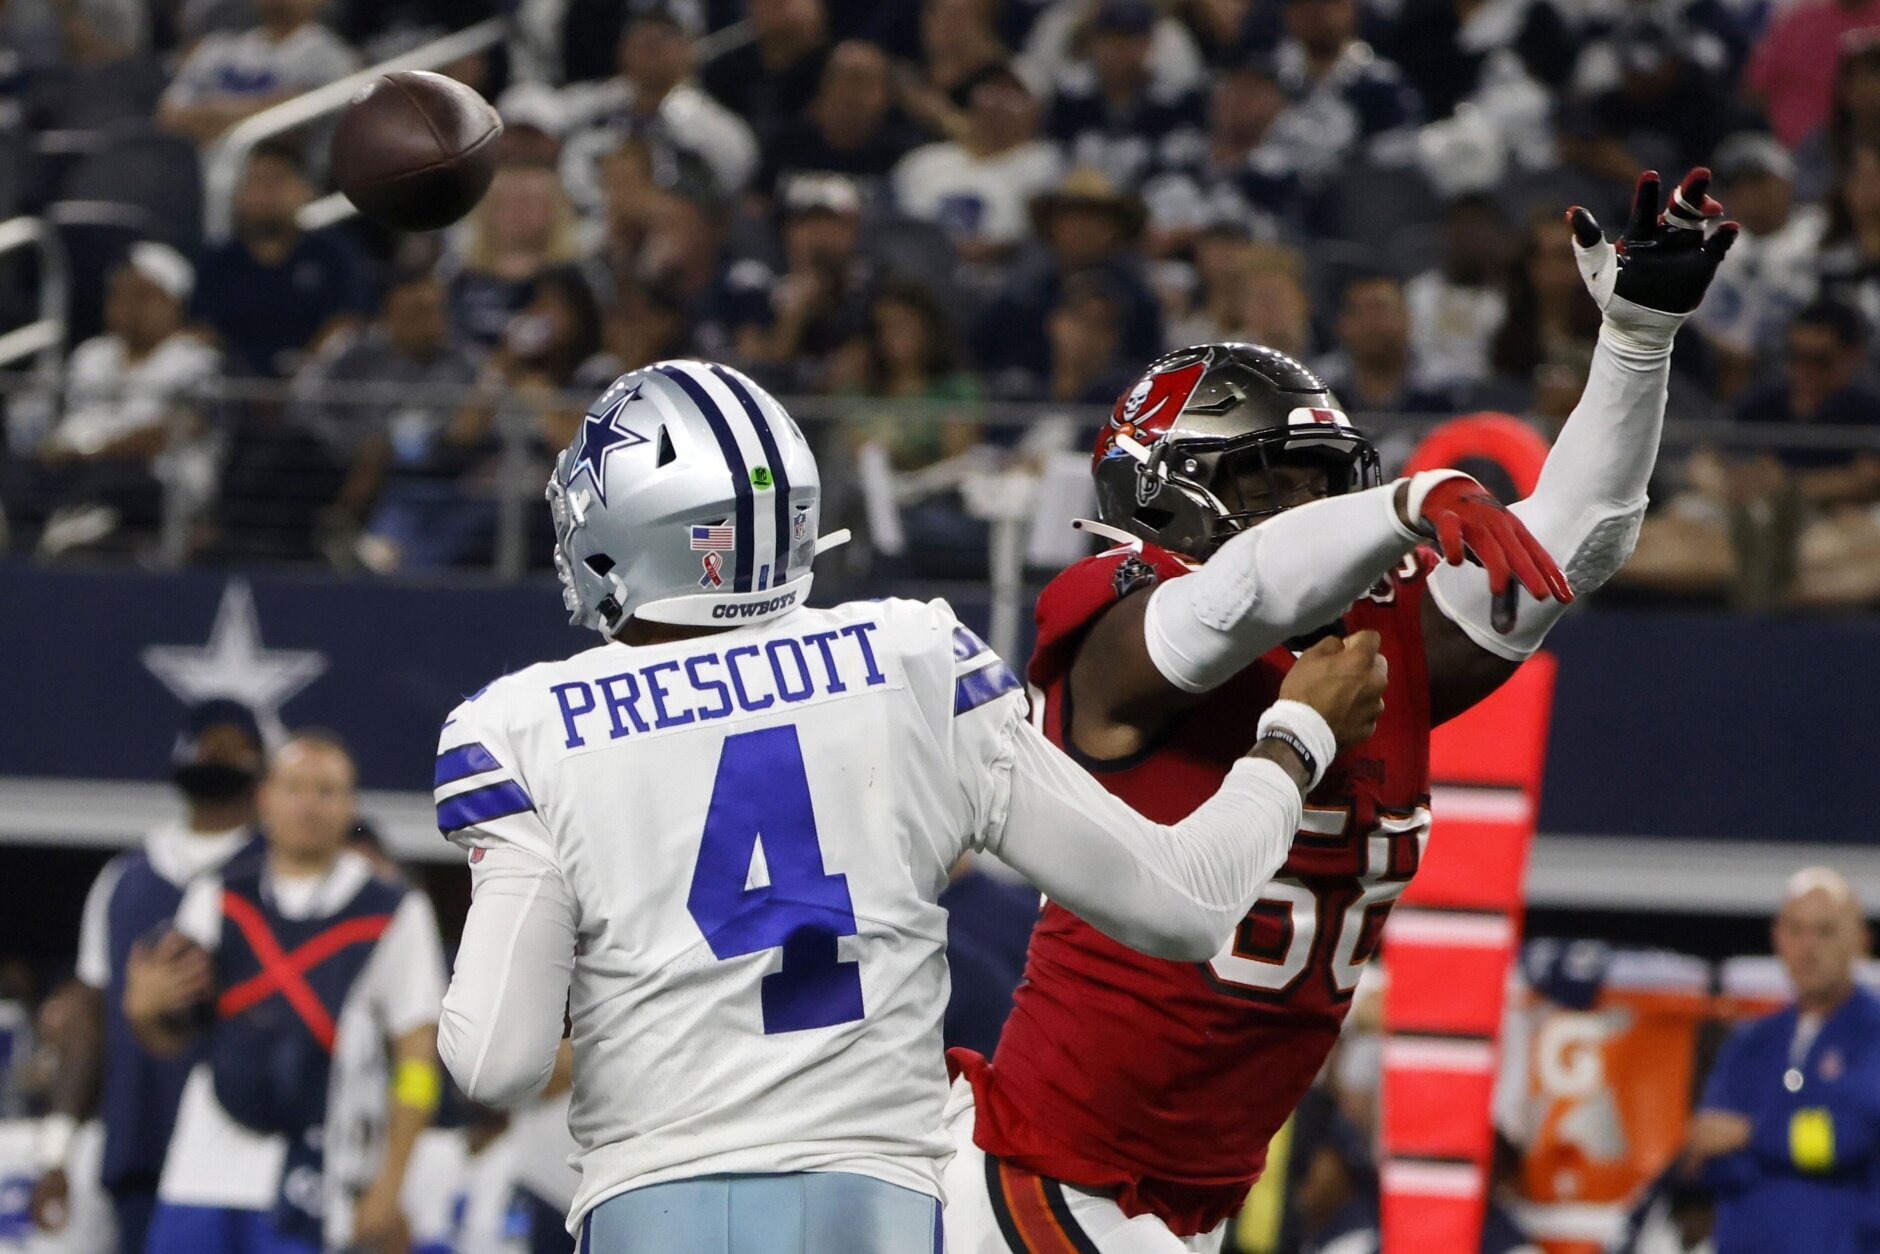 <p><b><i>Bucs 19</i></b><br />
<b><i>Cowboys 3</i></b></p>
<p>The NFL is so unpredictable that it can schedule the first-ever Week 1 meeting between the top two scoring offenses from the prior season and get a field goal-riddled, prime-time snoozefest.</p>
<p>But Dallas fans got another rude awakening from Dak Prescott — <a href="https://www.espn.com/nfl/story/_/id/34551180/dallas-cowboys-qb-dak-prescott-limited-practice-new-cleats-bother-ankle" target="_blank" rel="noopener">first it was the shoes</a>, now it&#8217;s his throwing hand sporting an injured thumb <a href="https://twitter.com/RobWoodfork/status/1569168718546239489?s=20&amp;t=cJc6iex9si21ziTYCX88QA" target="_blank" rel="noopener">his boss says needs surgery</a>, which sounds a lot like Dak will be sidelined just long enough for the Cowboys to fall way behind in a division that, after only one week, looks more competitive than previously thought.</p>
<p>If Dallas, WITH Dak could only muster the second-worst Week 1 scoring output in franchise history, what happens if they have to go an extended period with Cooper Rush running the offense? Football season in Texas might be over before it fully begins.</p>
